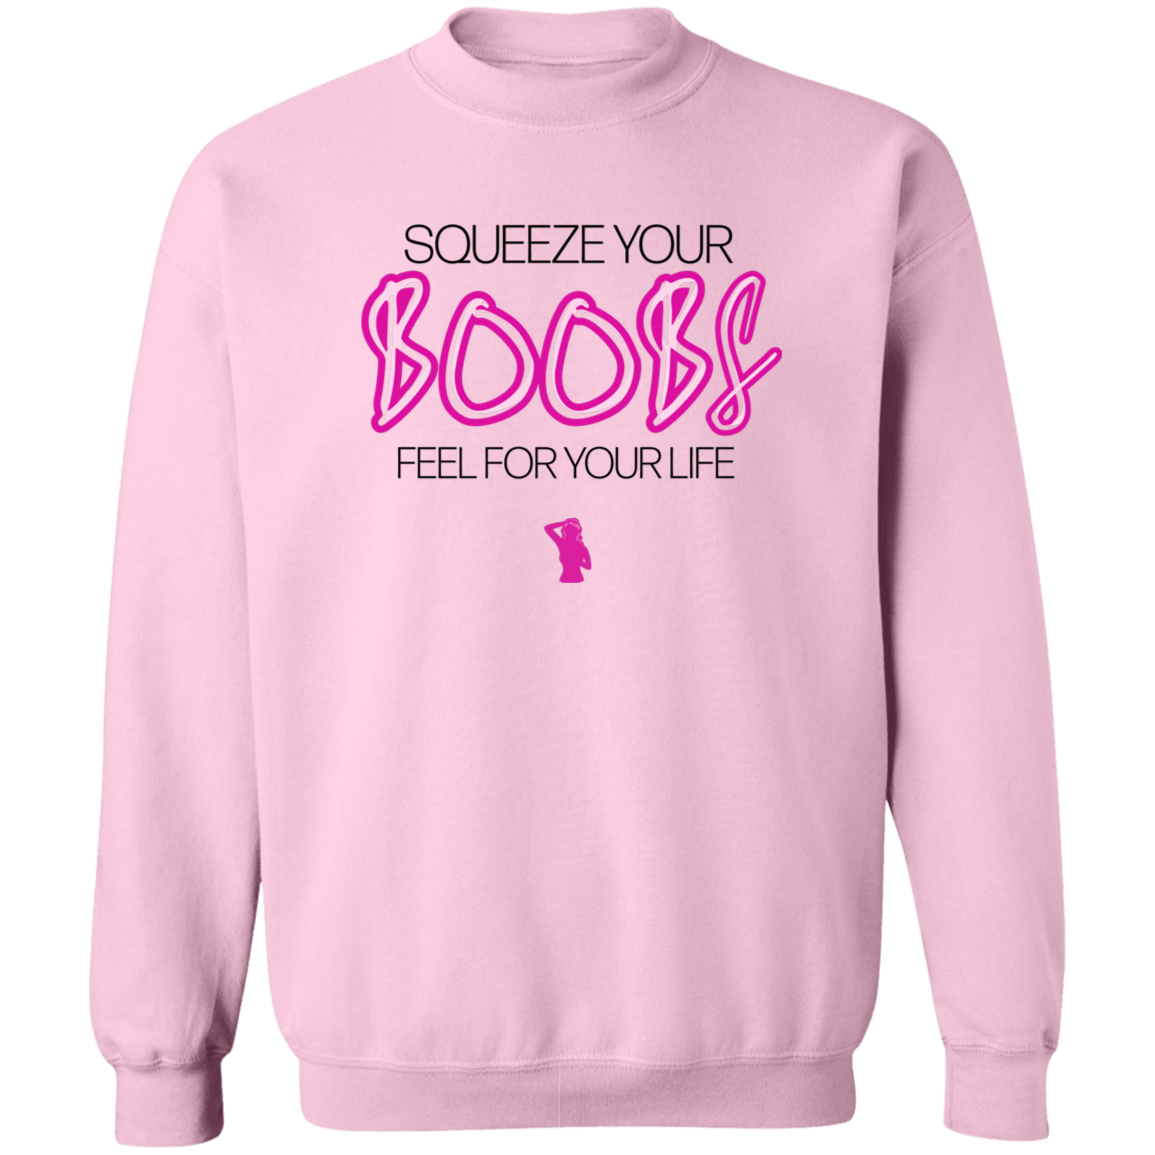 Squeeze Your Boobs Sweater Pink